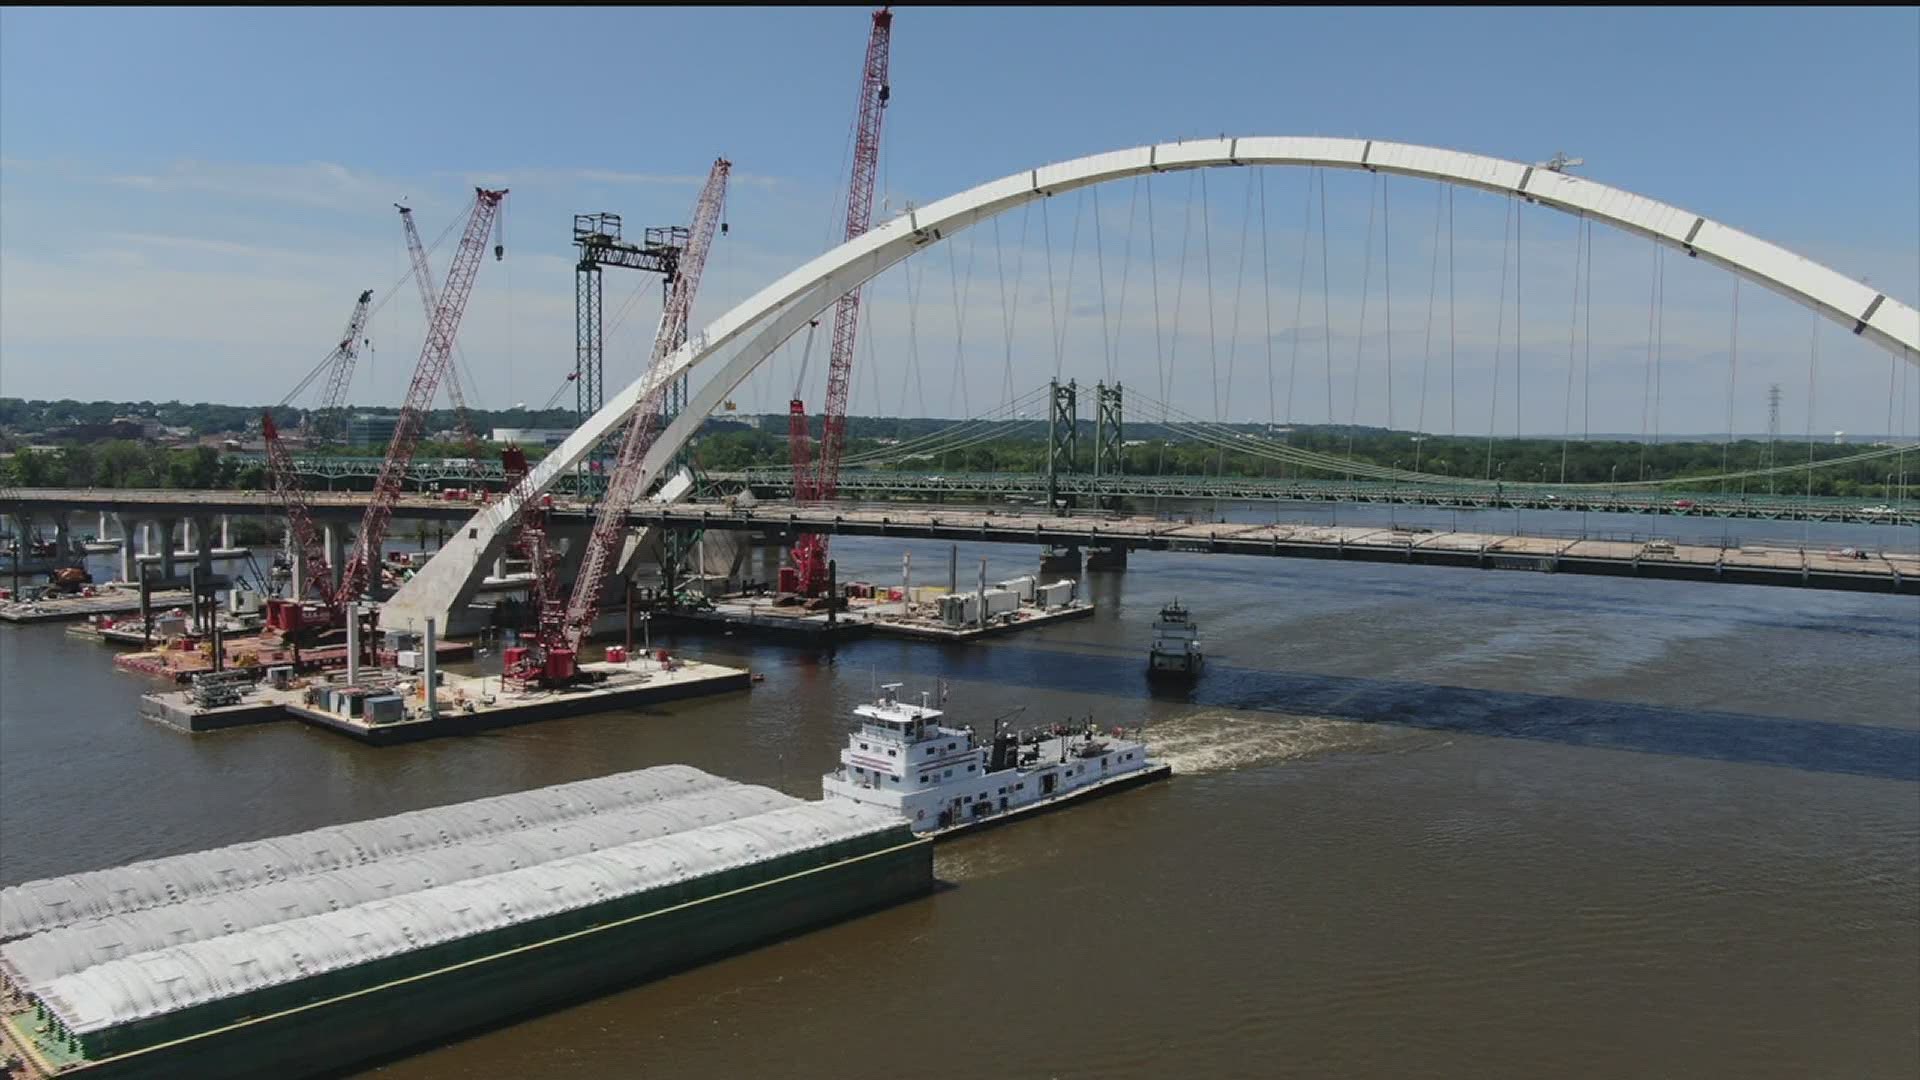 The Iowa-bound side of the new I-74 bridge is expected to open to traffic by the end of 2020.